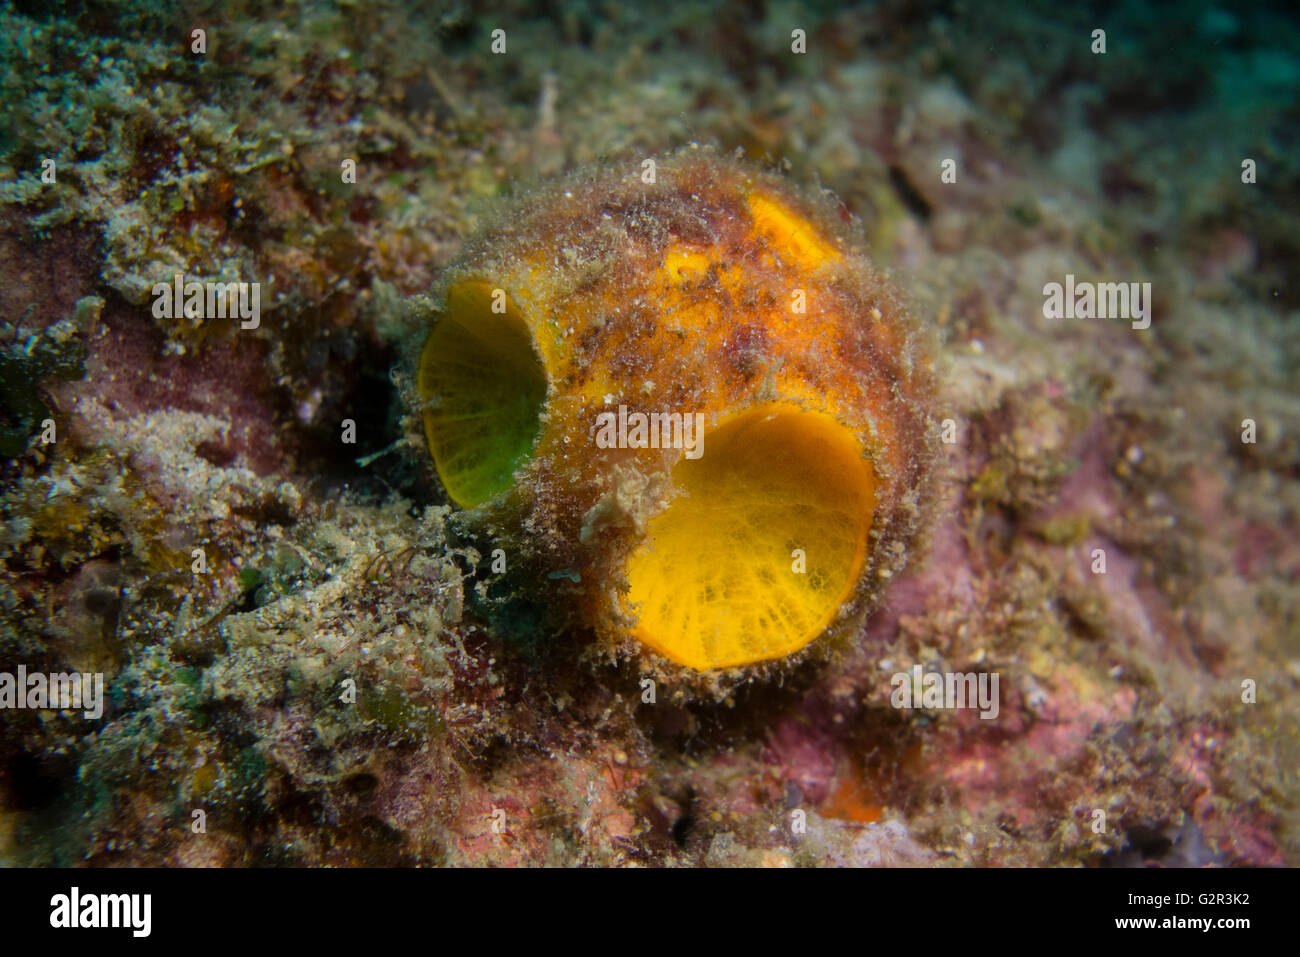 Orange or Golf ball sponge, Cinachyra australiensis, from the South China Sea, Coral Triangle, Brunei Darussalam. Stock Photo